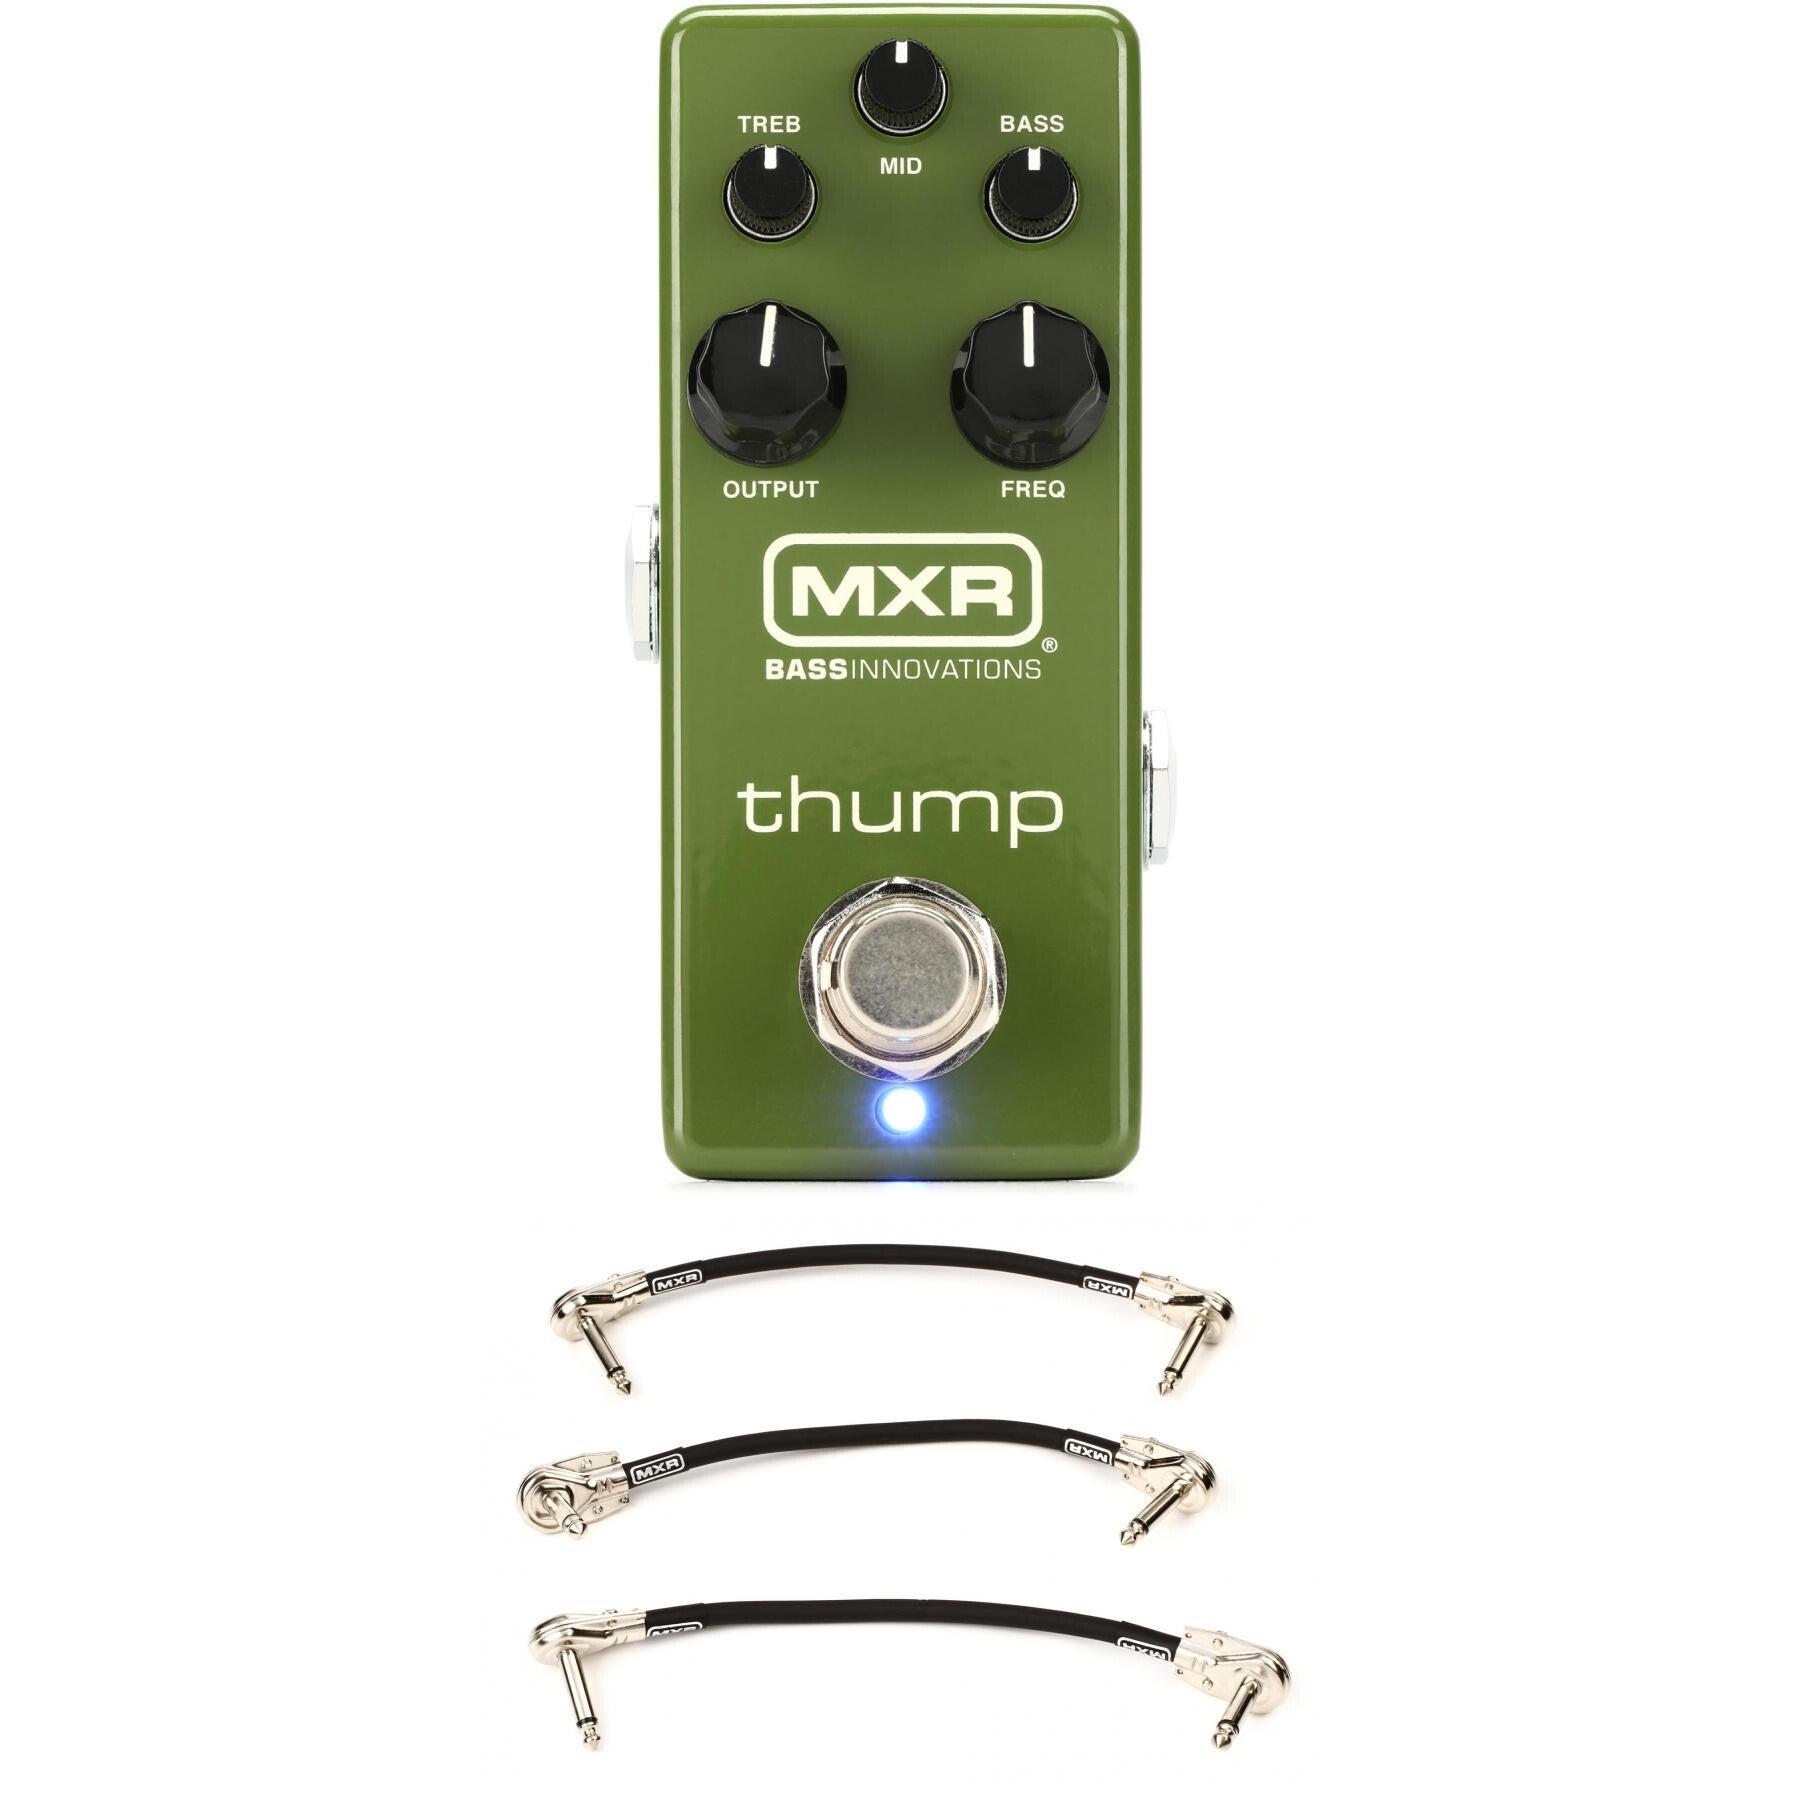 MXR Thump Bass Preamp Pedal | Sweetwater